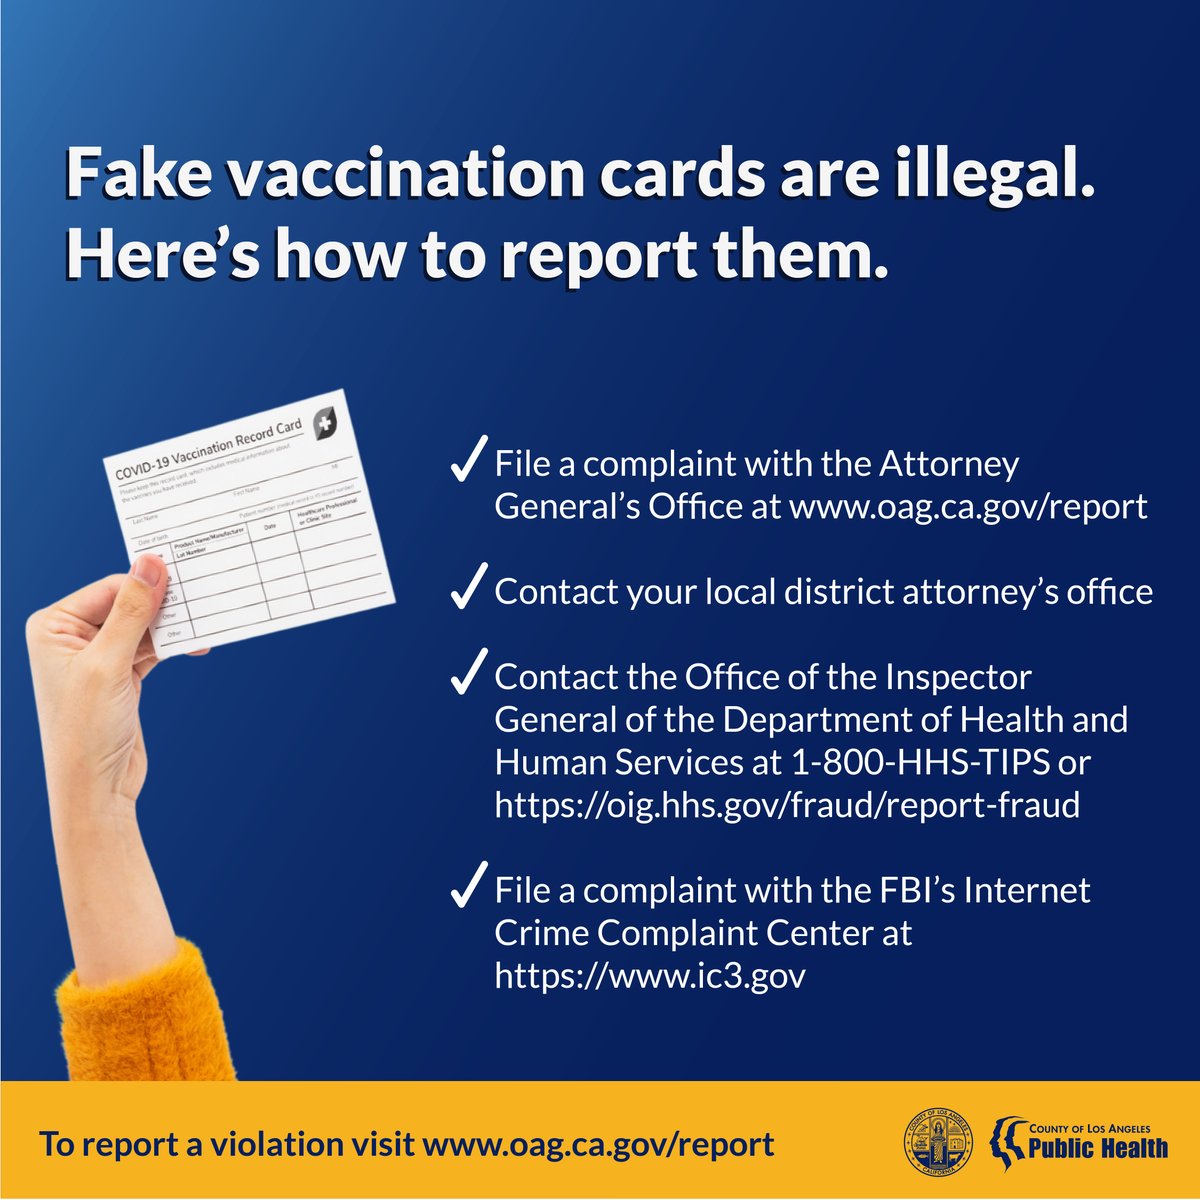 How to Tell If a COVID-19 Vaccine Card Is Fake or Real